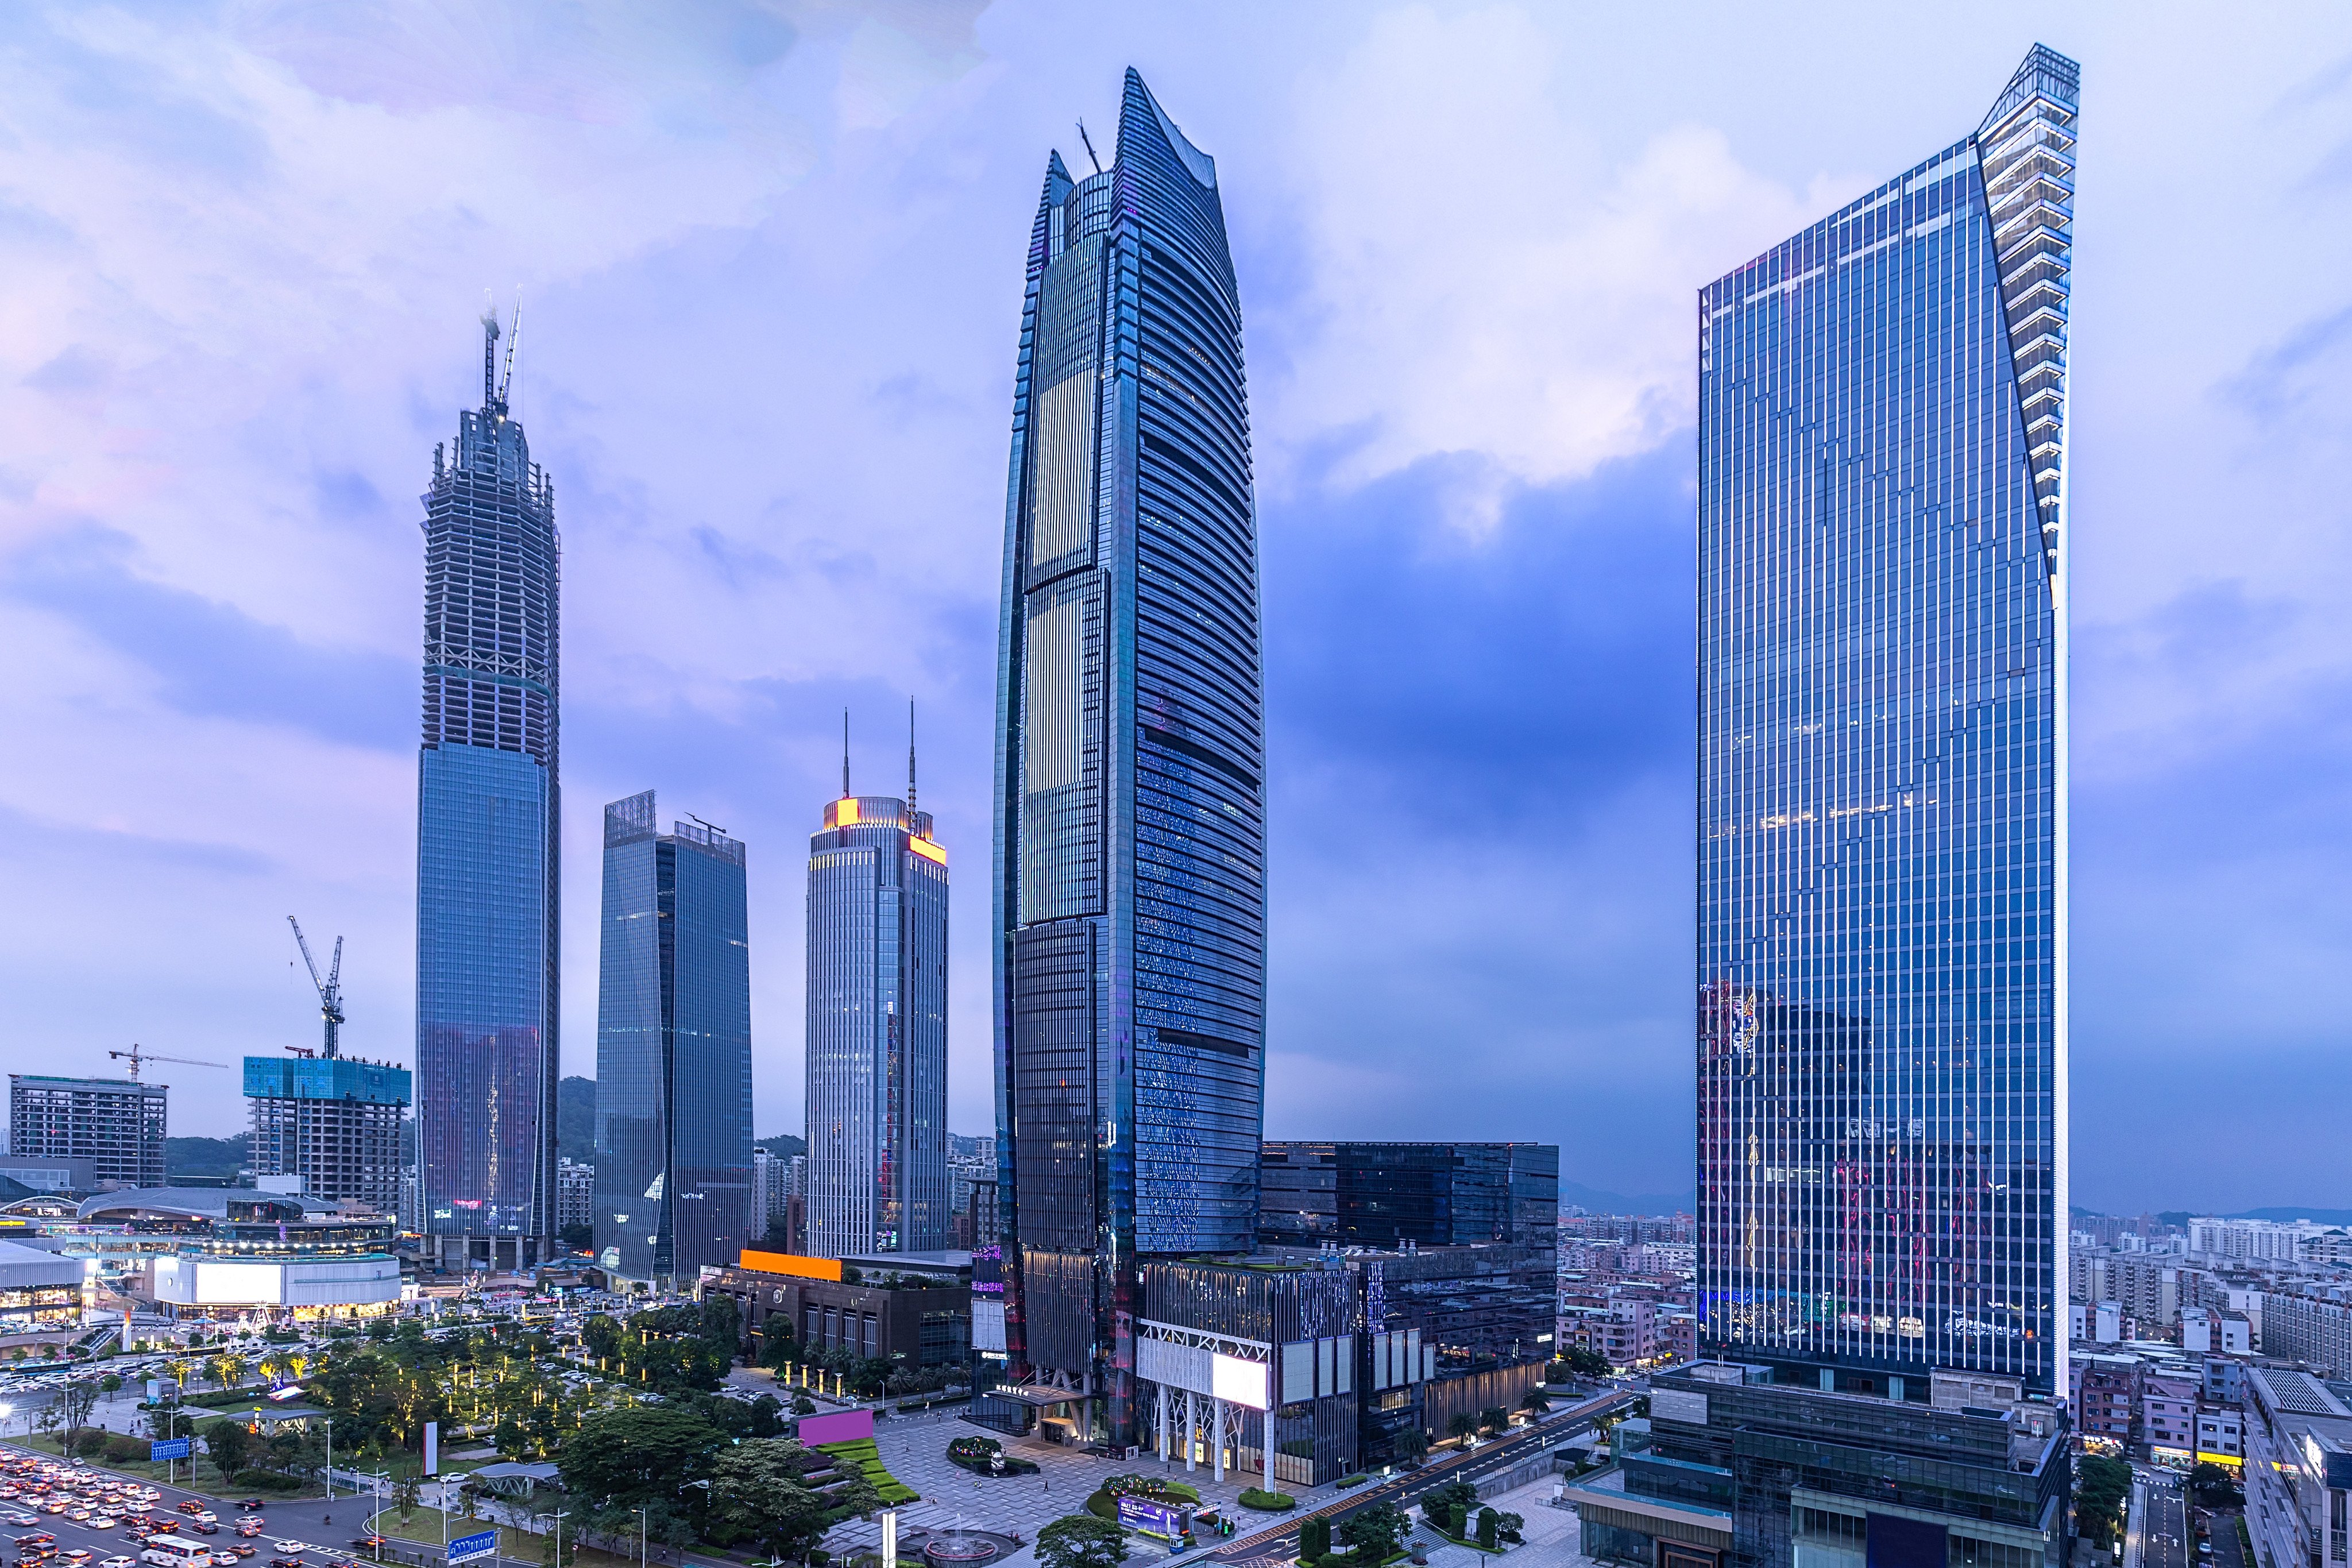 K Wah is banking on the fact that Dongguan is located about 40 minutes away from Guangzhou and Shenzhen, and is within 60 minutes direct access of Hong Kong’s West Kowloon Station through the Express Rail Link. Photo: Shutterstock Images